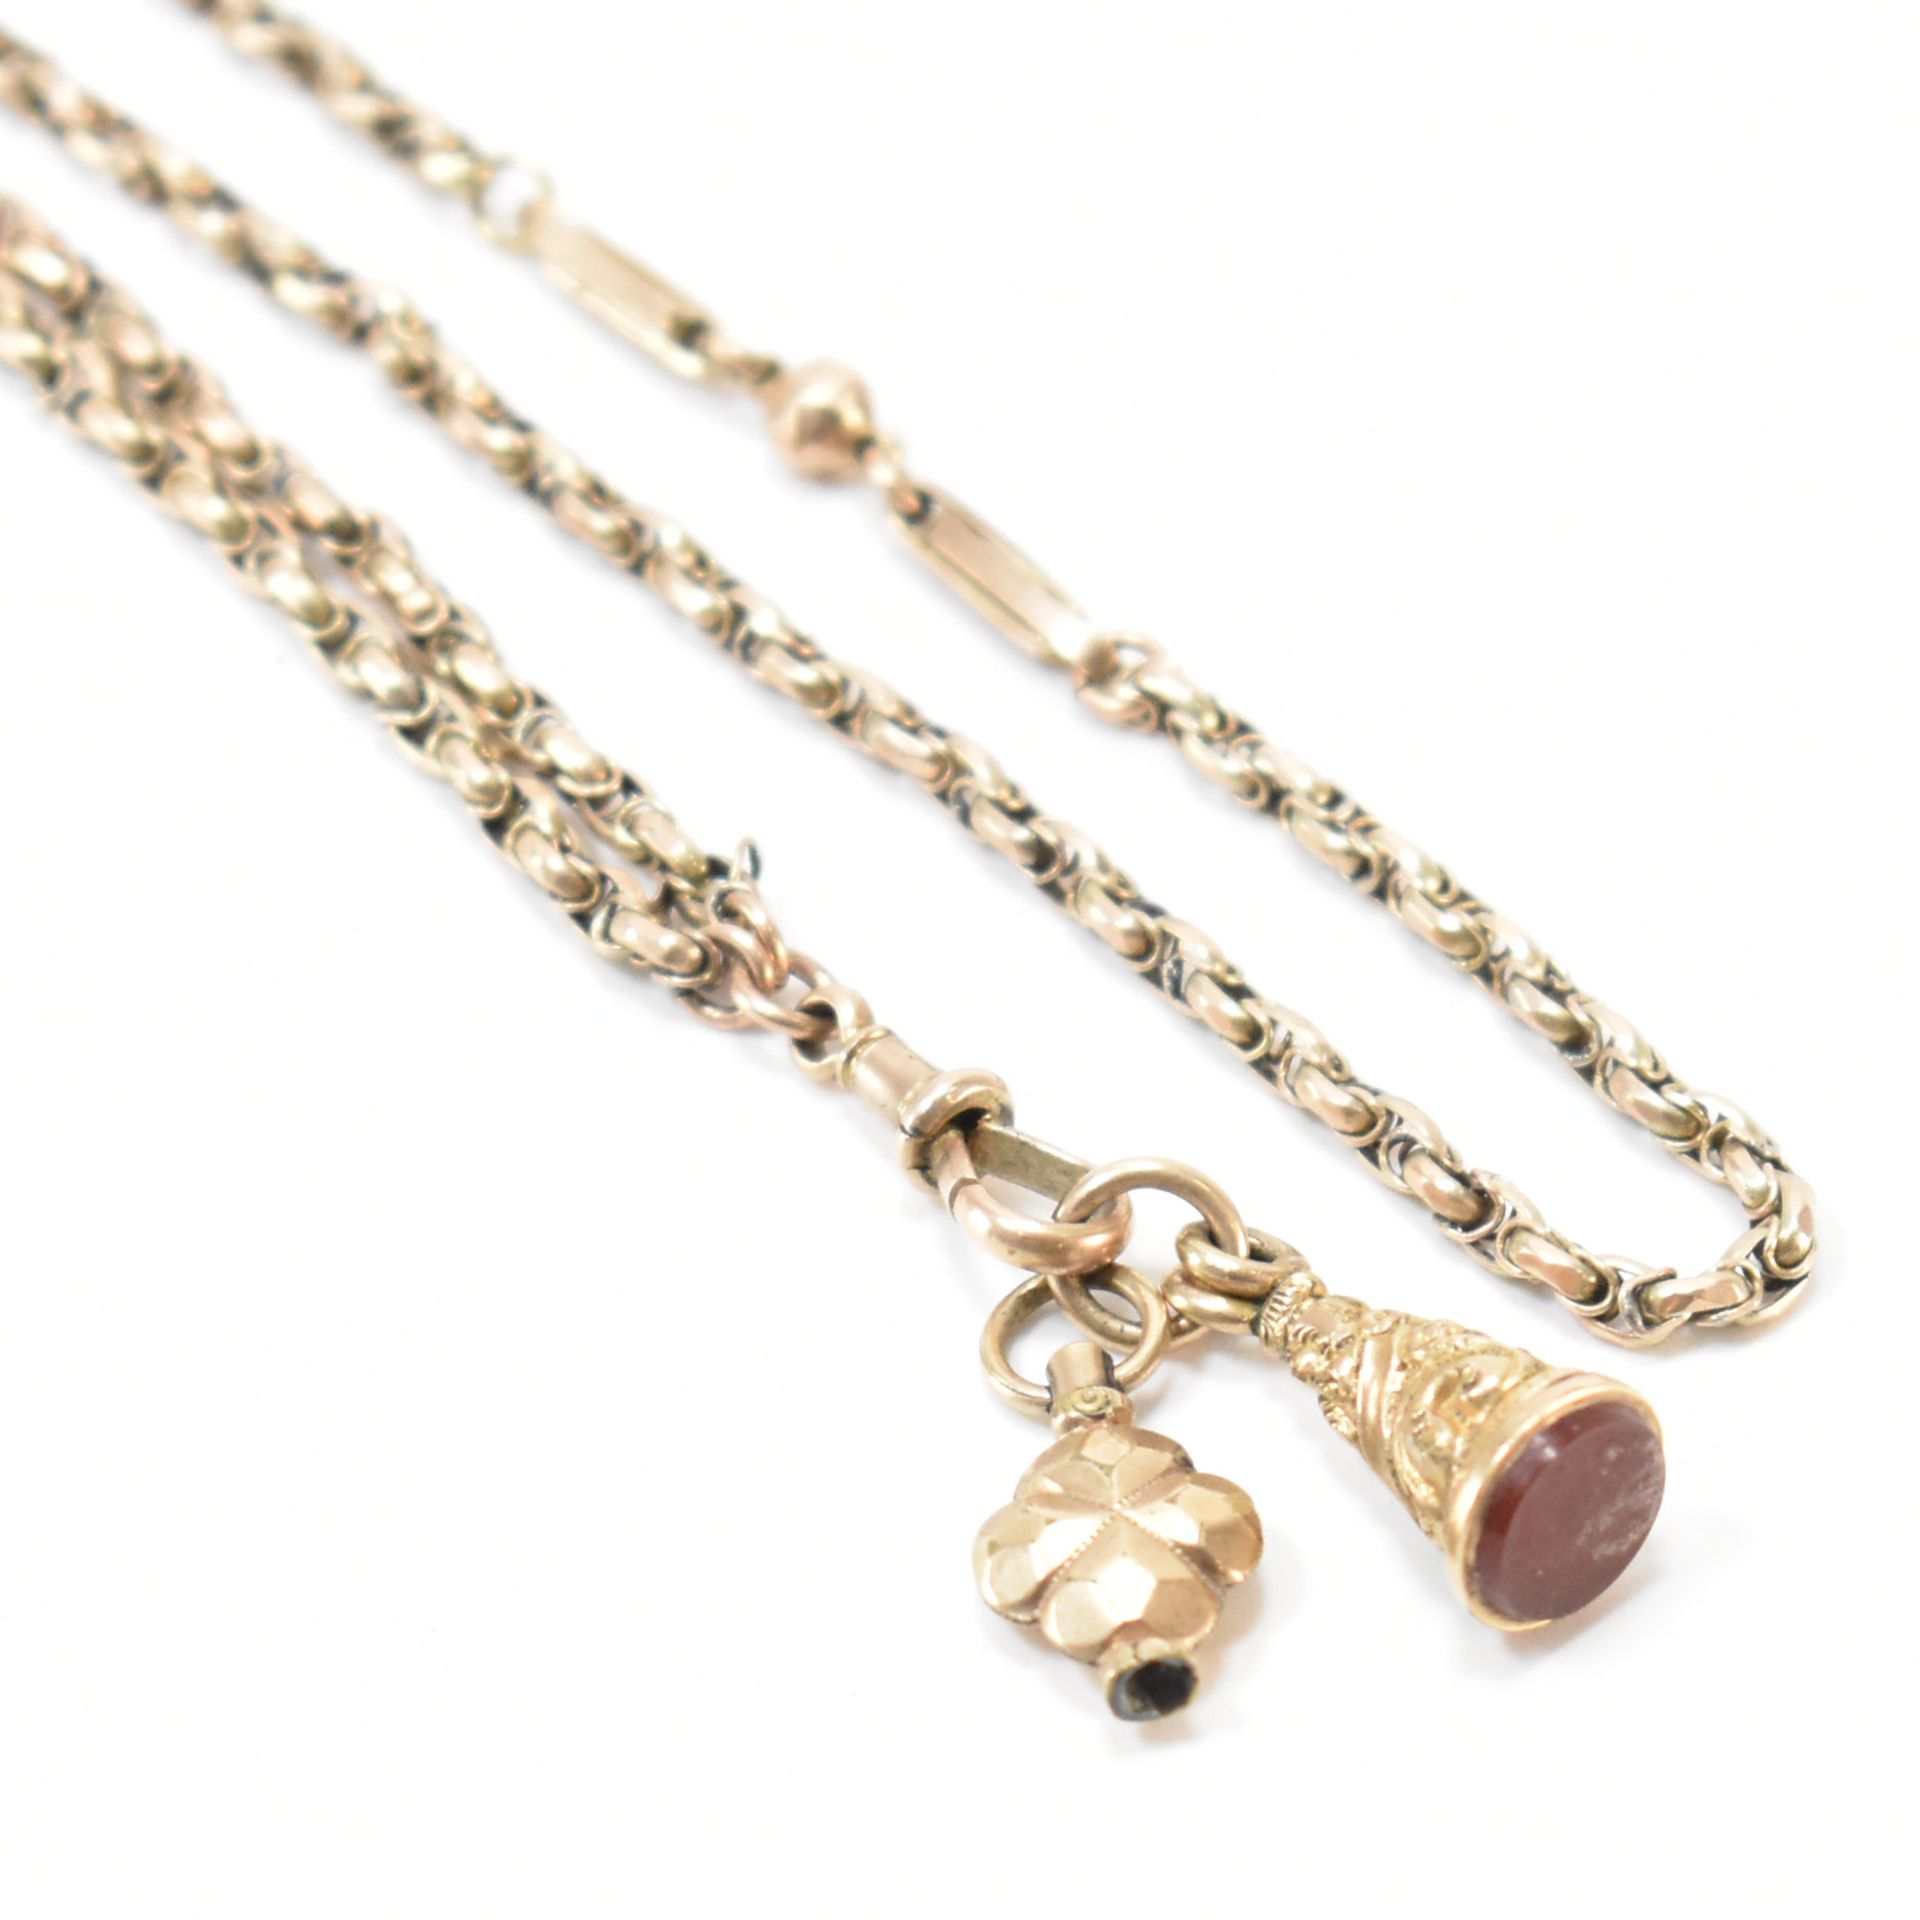 VICTORIAN GOLD POCKET WATCH CHAIN NECKLACE